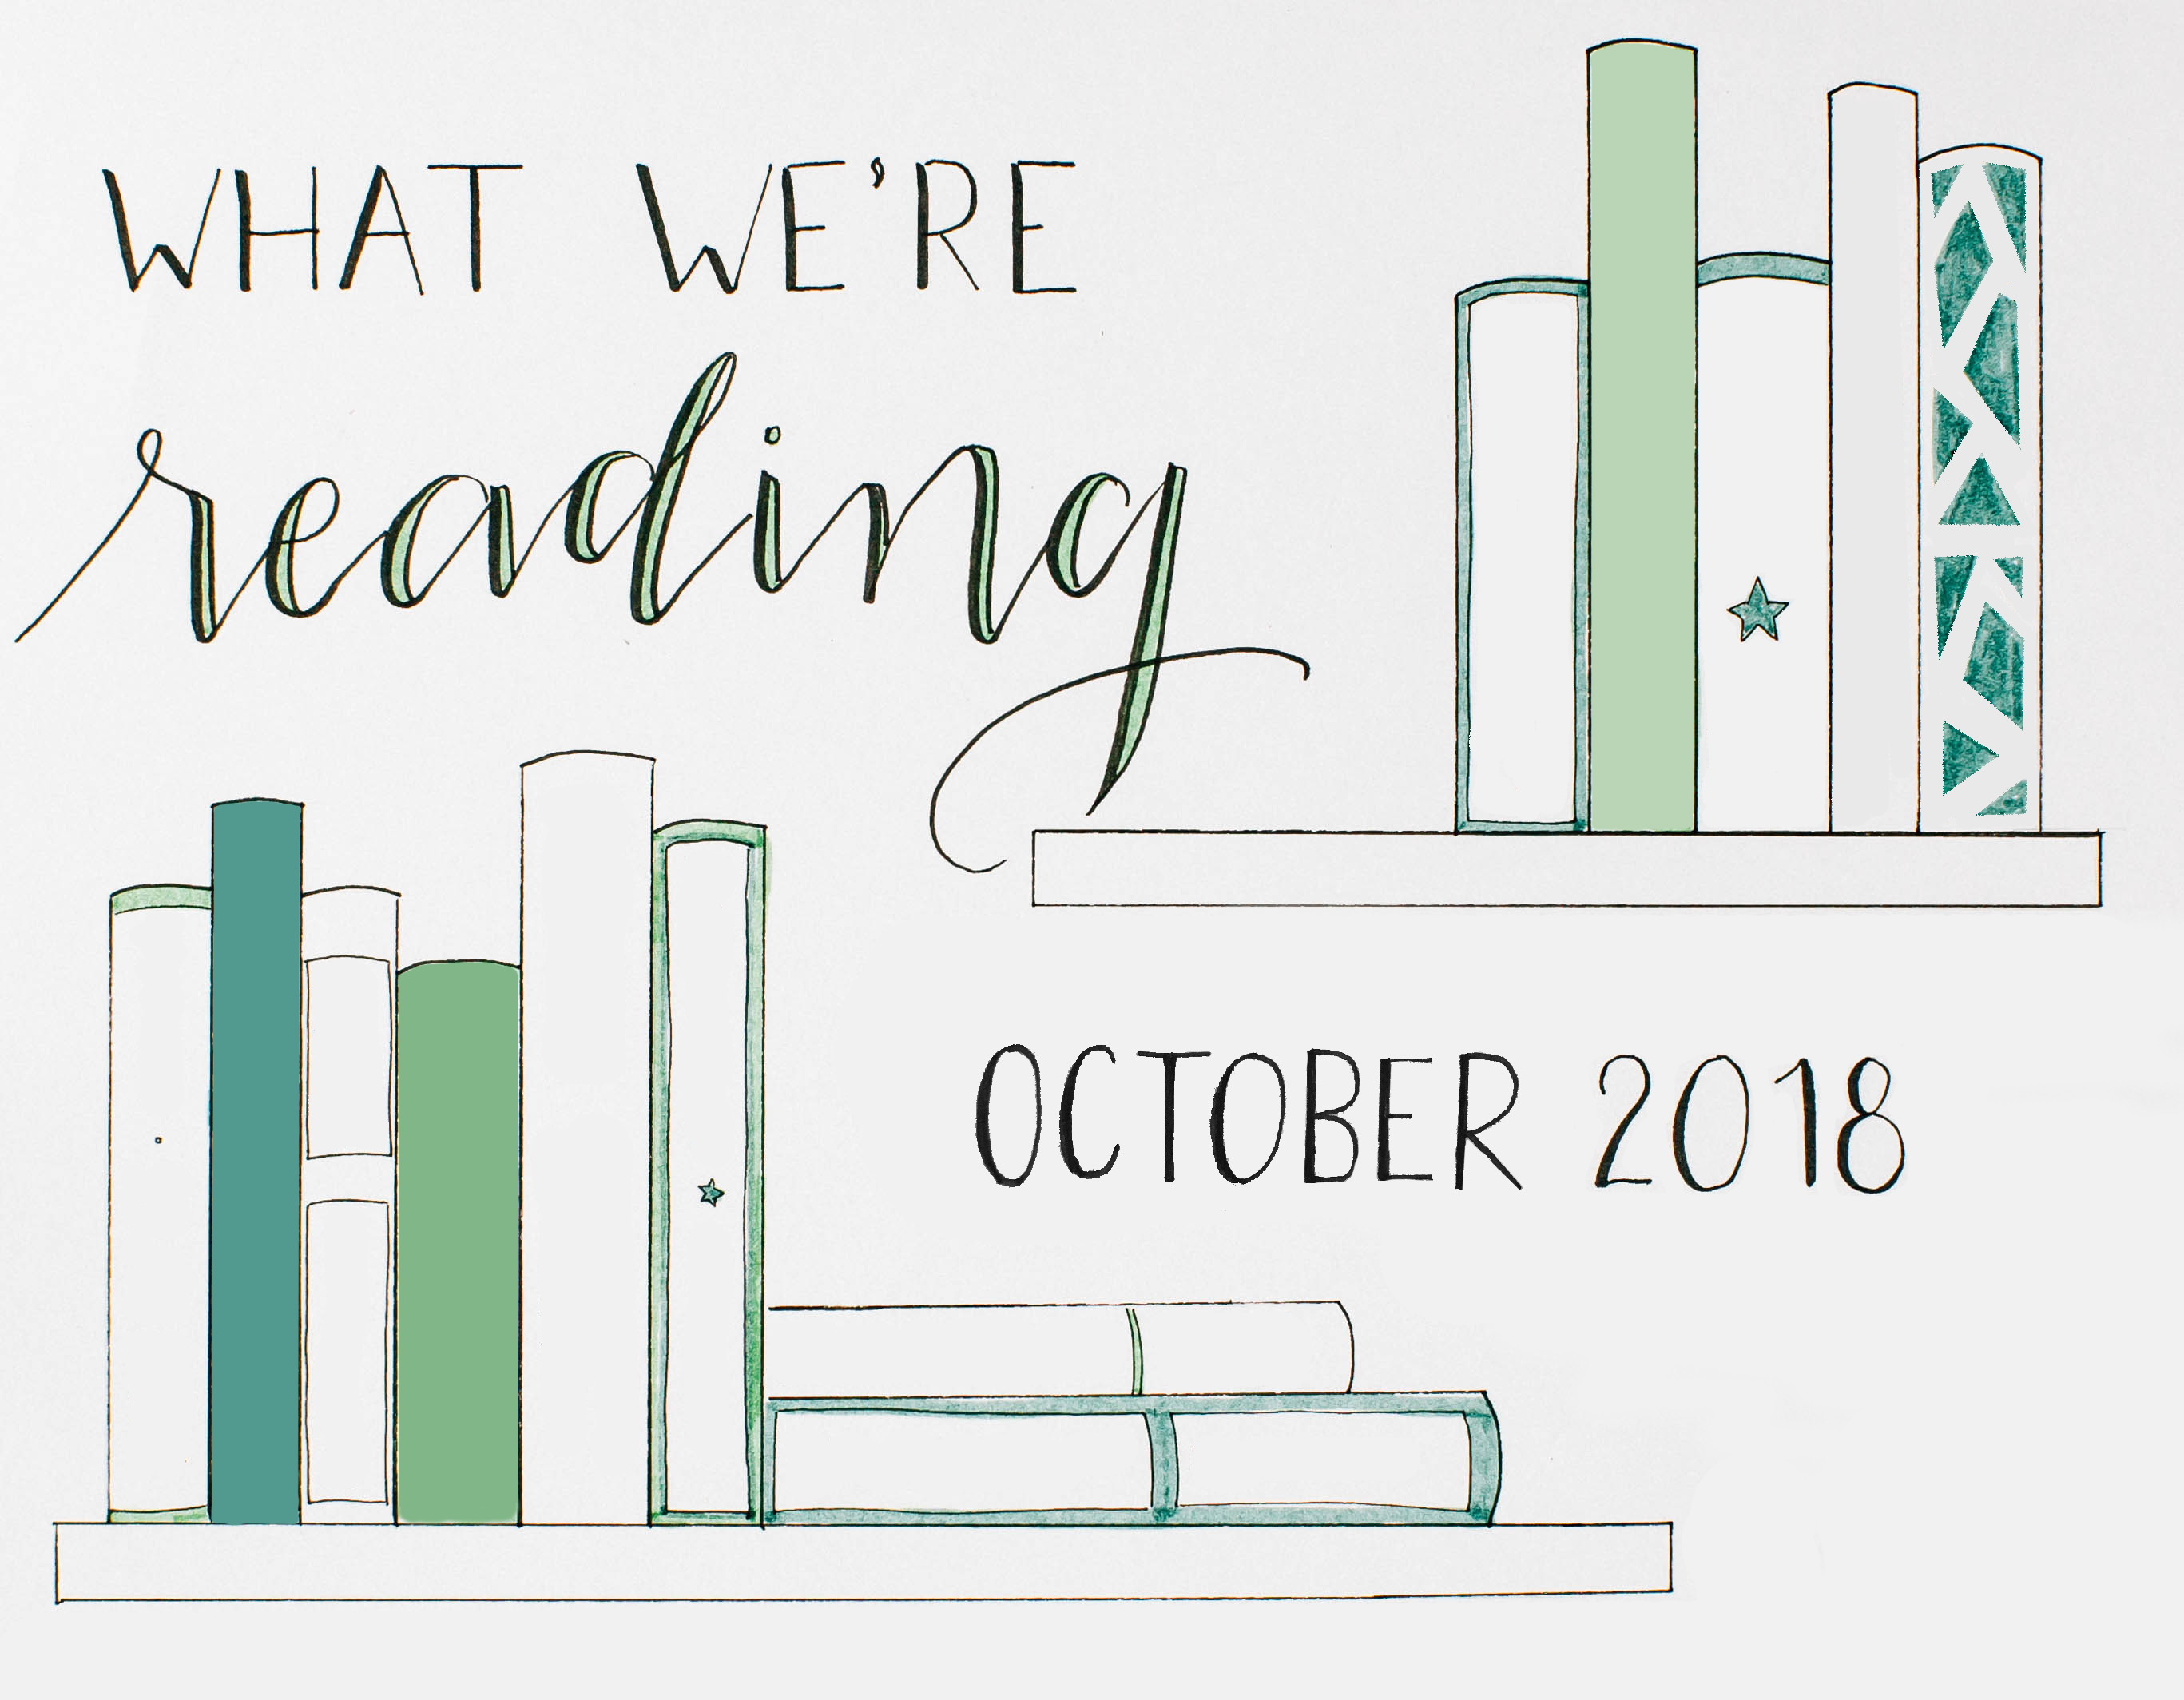 An artistic representation of a bookshelf with assorted books and the phrase "what we're reading october 2018" indicating a themed list or record of books being read during that month.